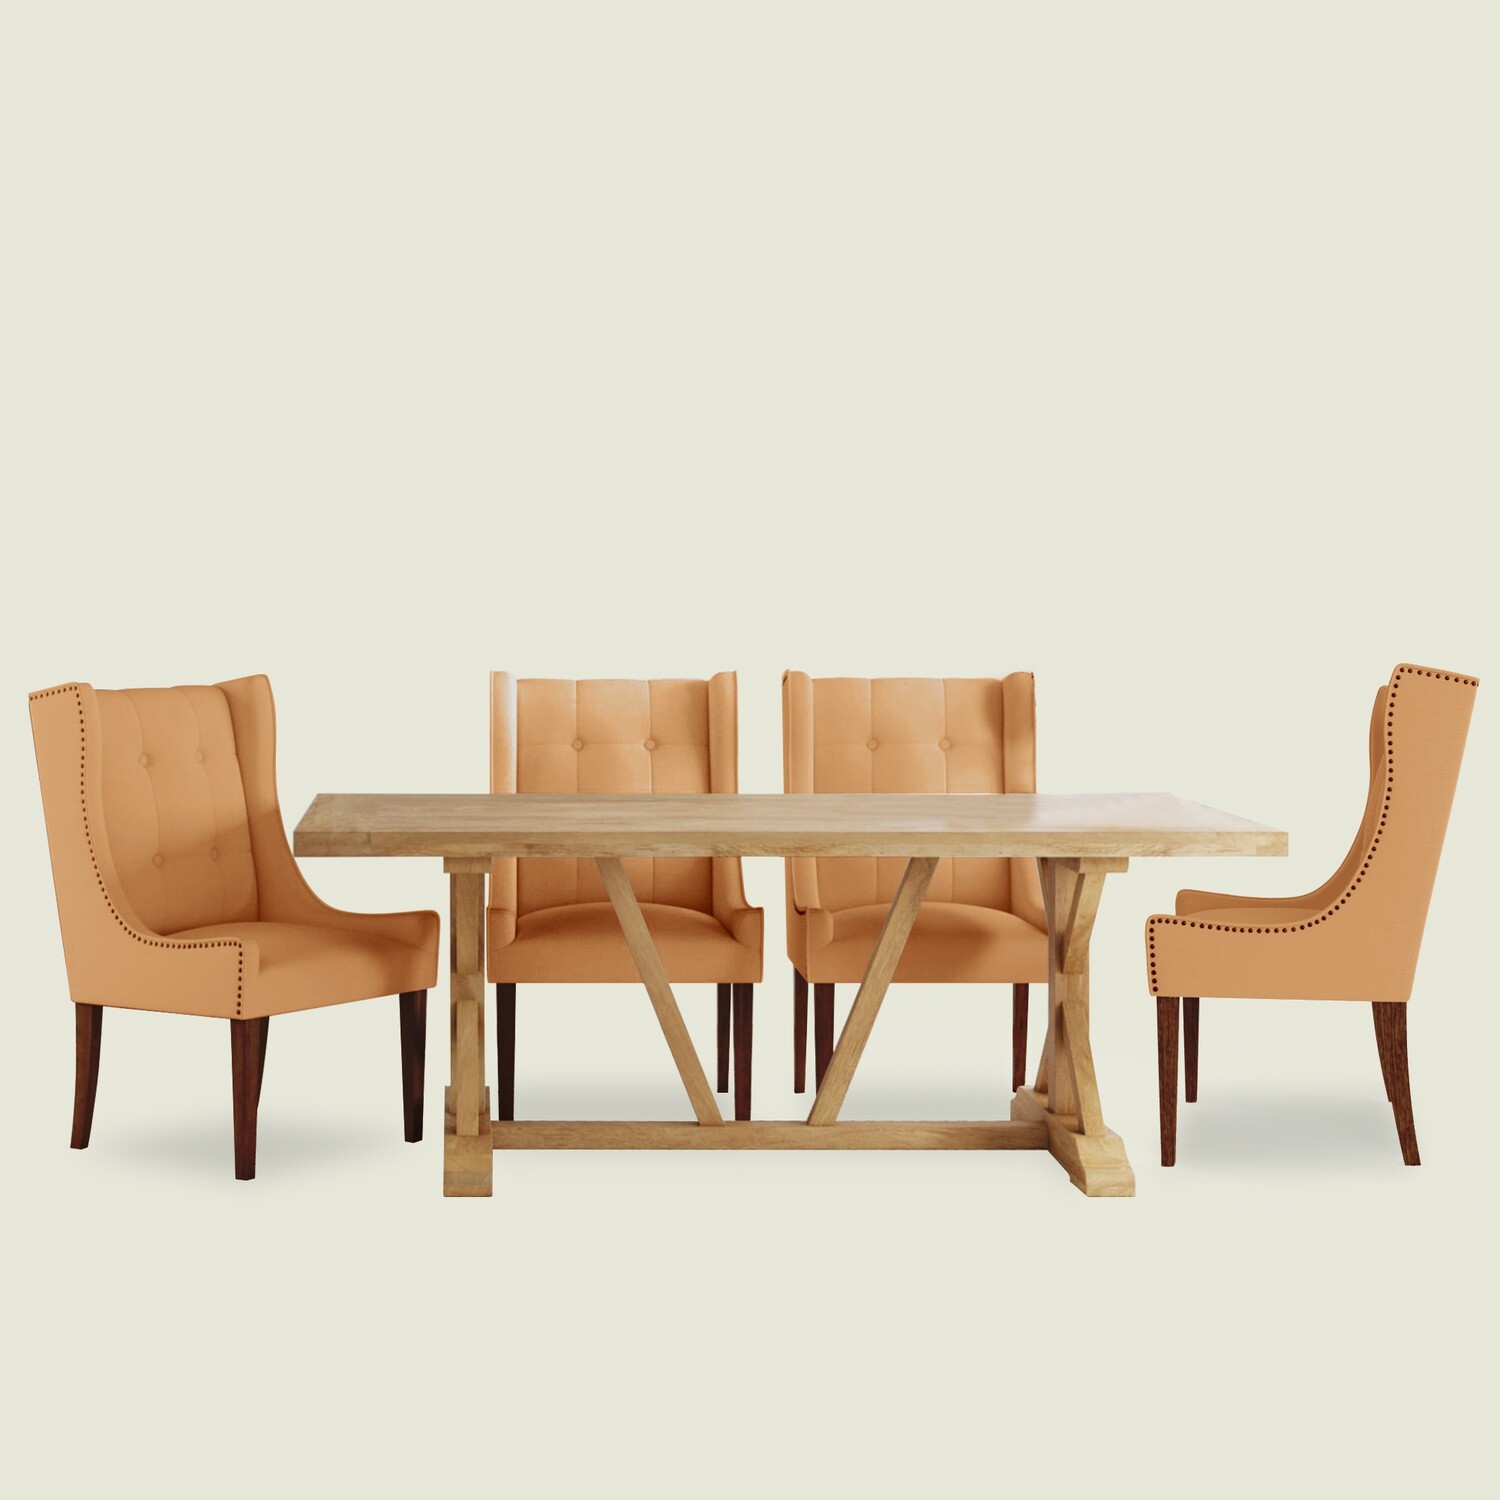 Gable Luxury Dining Table Set - 4, 6 & 8 Seater/All Sizes